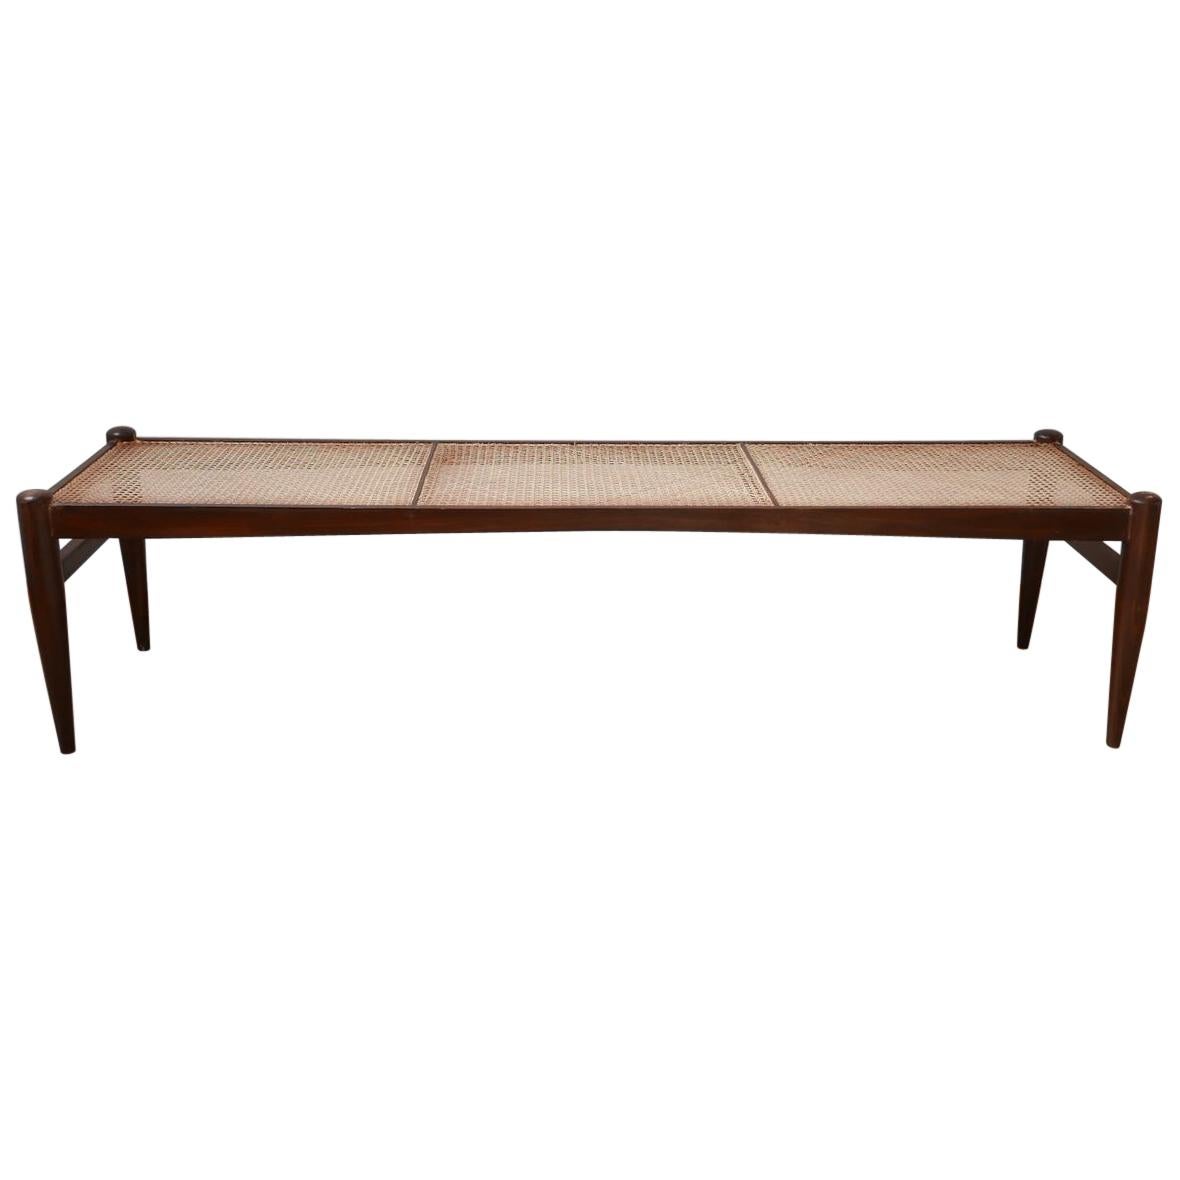 Swedish Mid-Century Long Cane Bench or Coffee Table